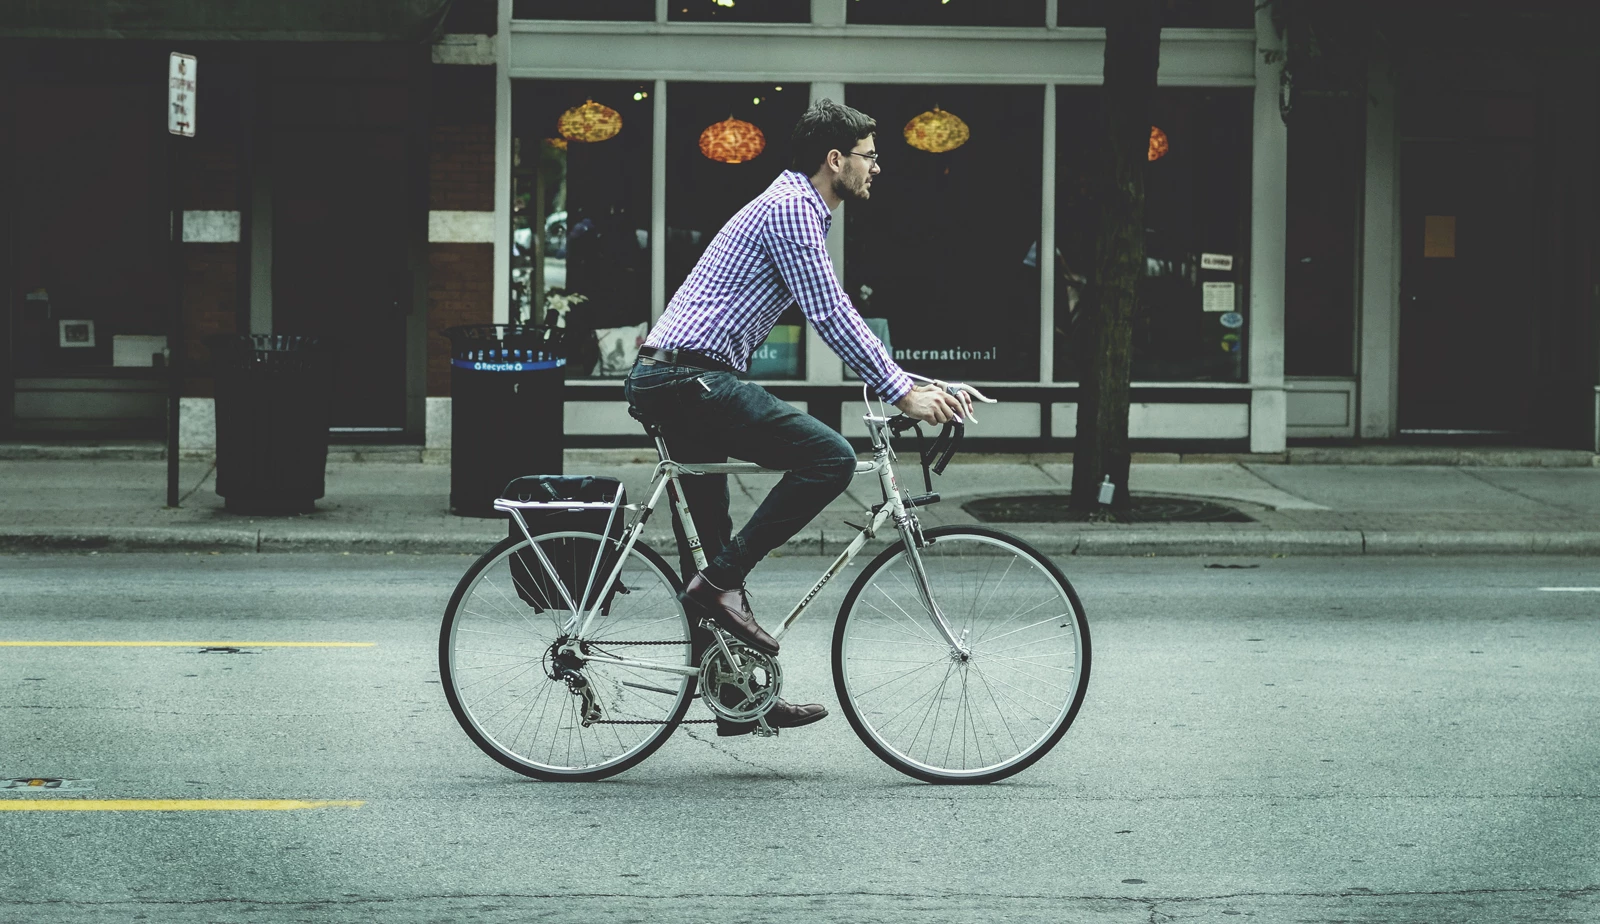 A man commuting on a bicycle through a city